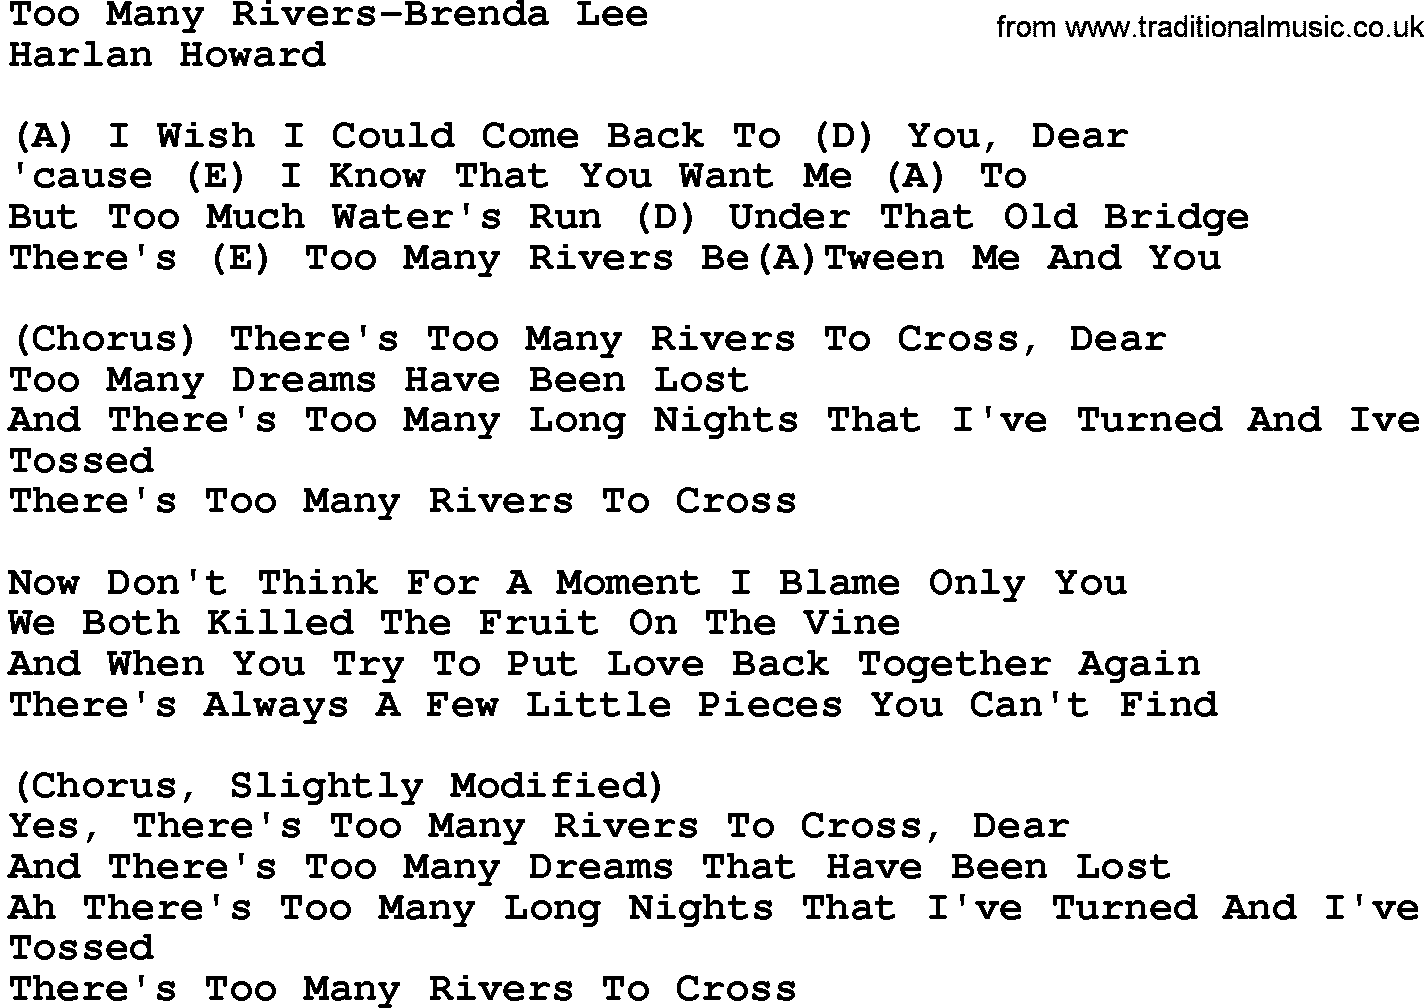 Country music song: Too Many Rivers-Brenda Lee lyrics and chords